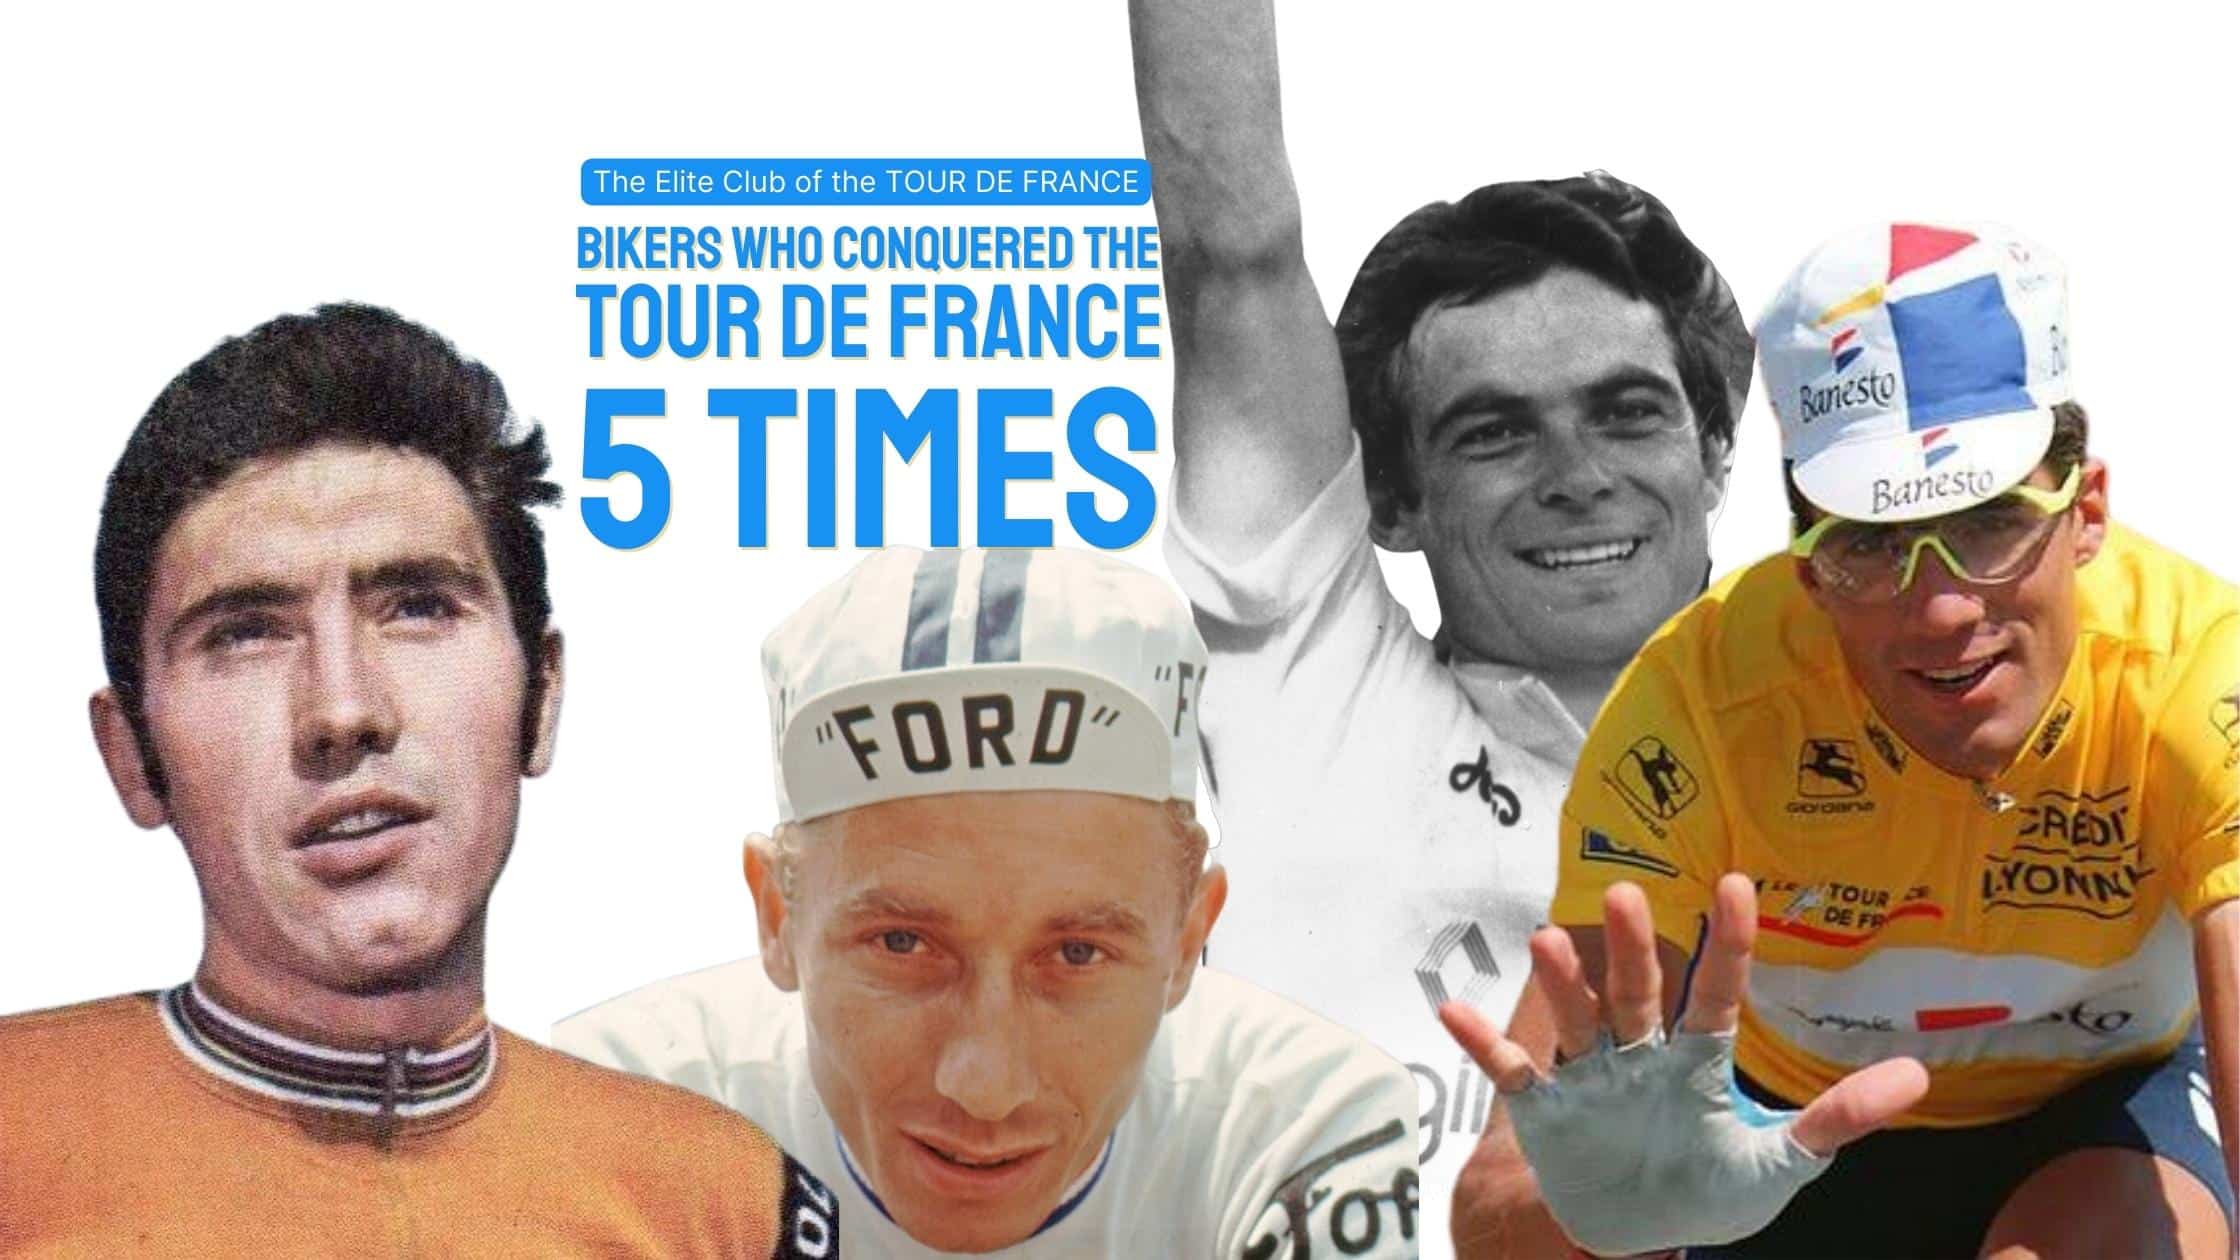 The Elite Club: Bikers Who Conquered the Tour de France 5 Times